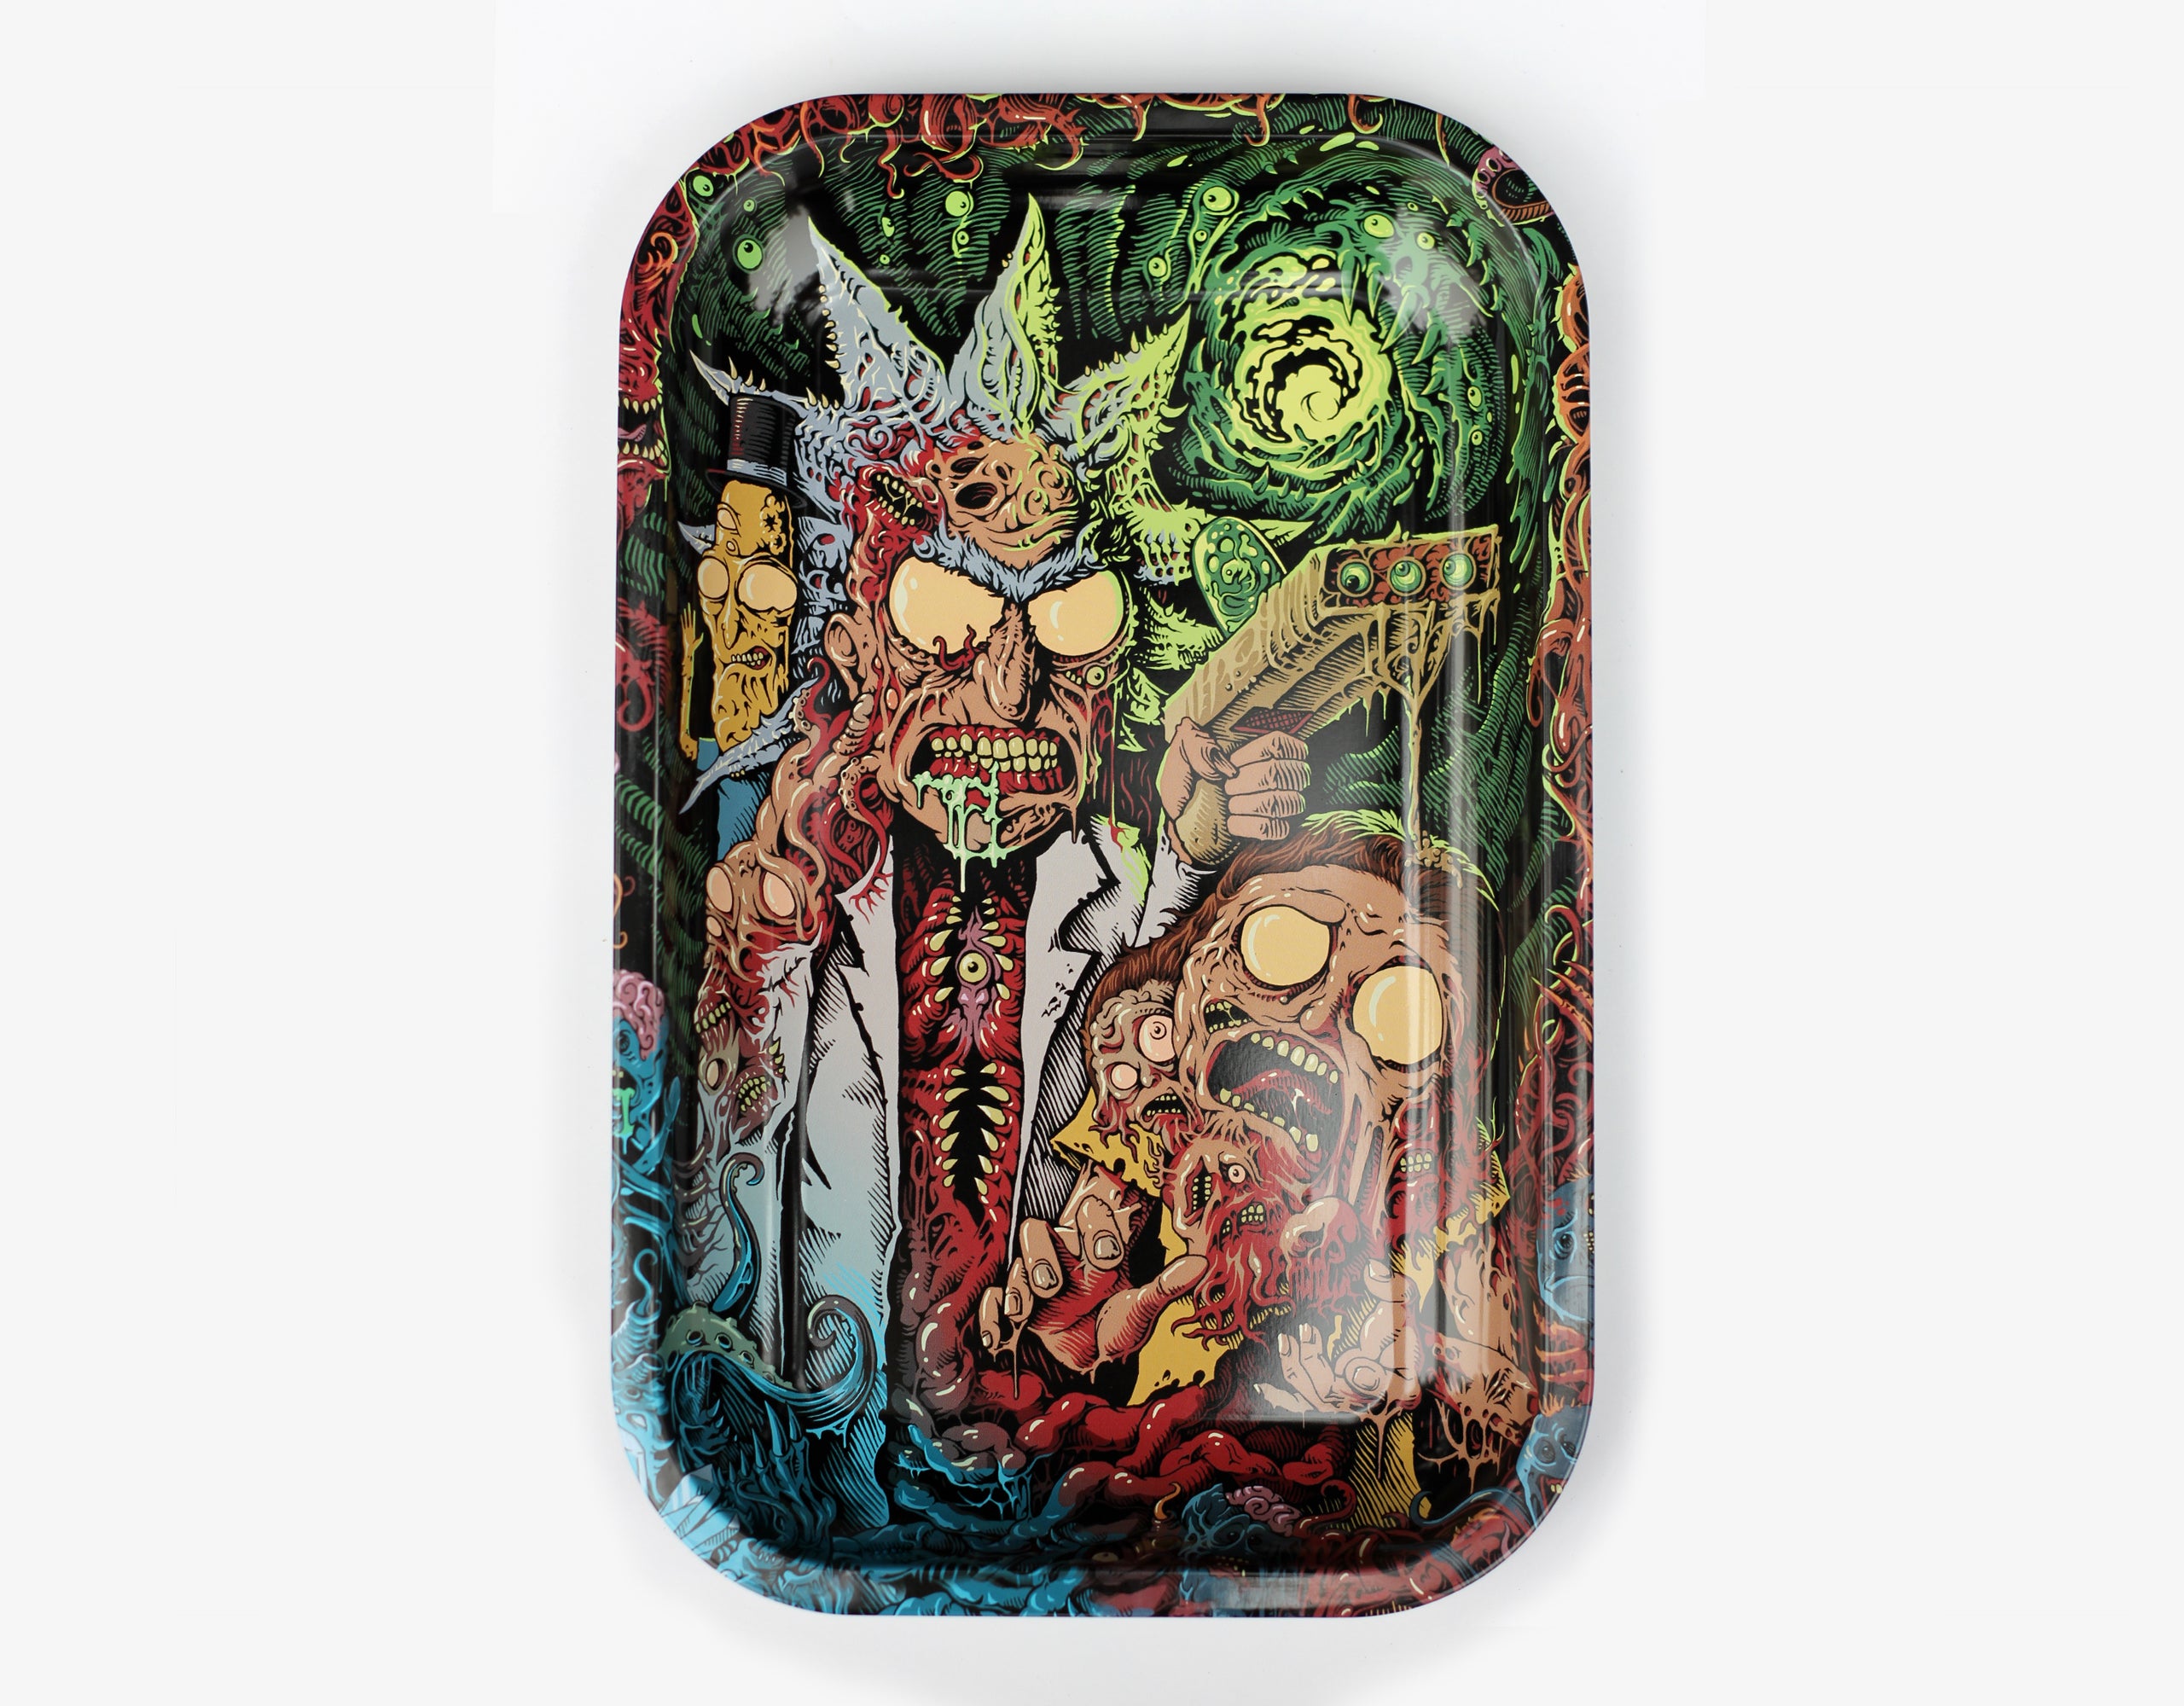 Sketchy Eddie - Trippy Rick and morty rolling tray!